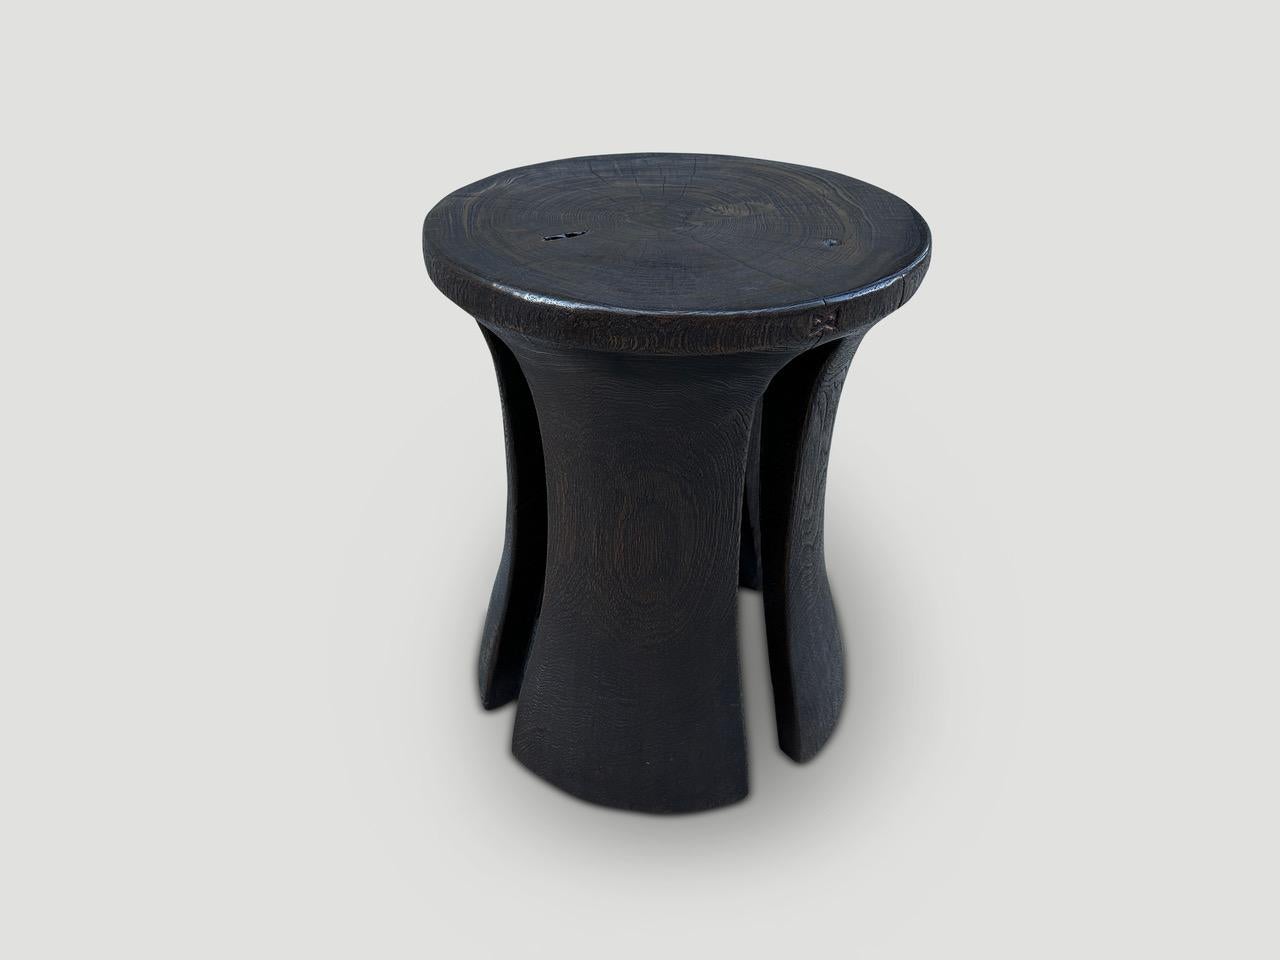 Contemporary Andrianna Shamaris Sculptural Side Table or Stool